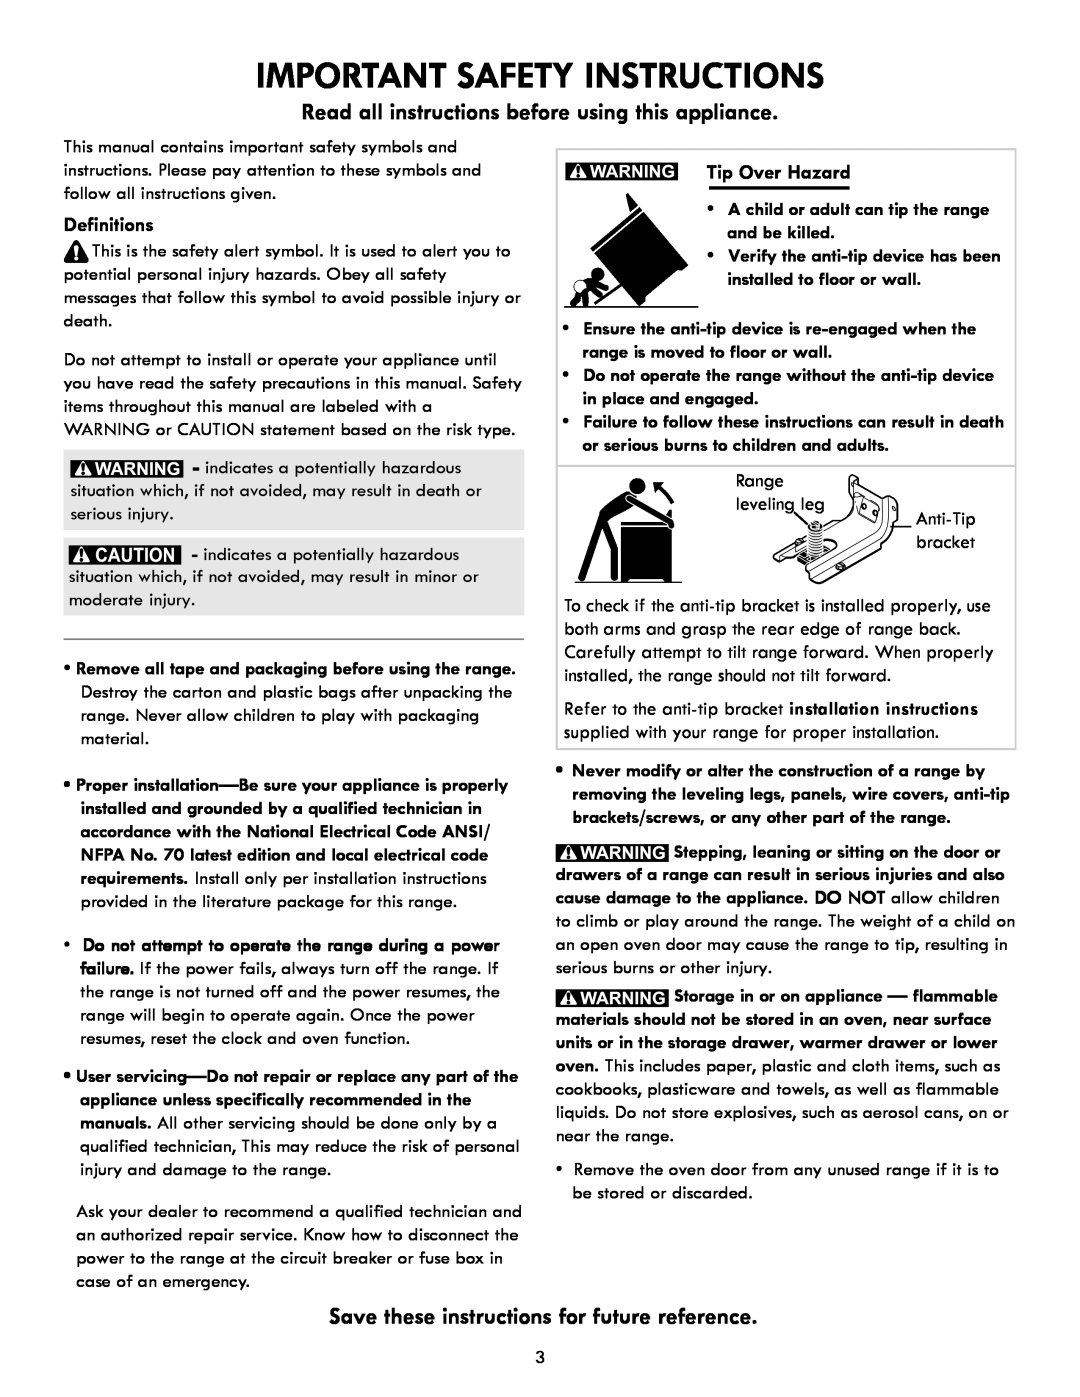 Kenmore 790 Important Safety Instructions, Read all instructions before using this appliance, Definitions, Tip Over Hazard 